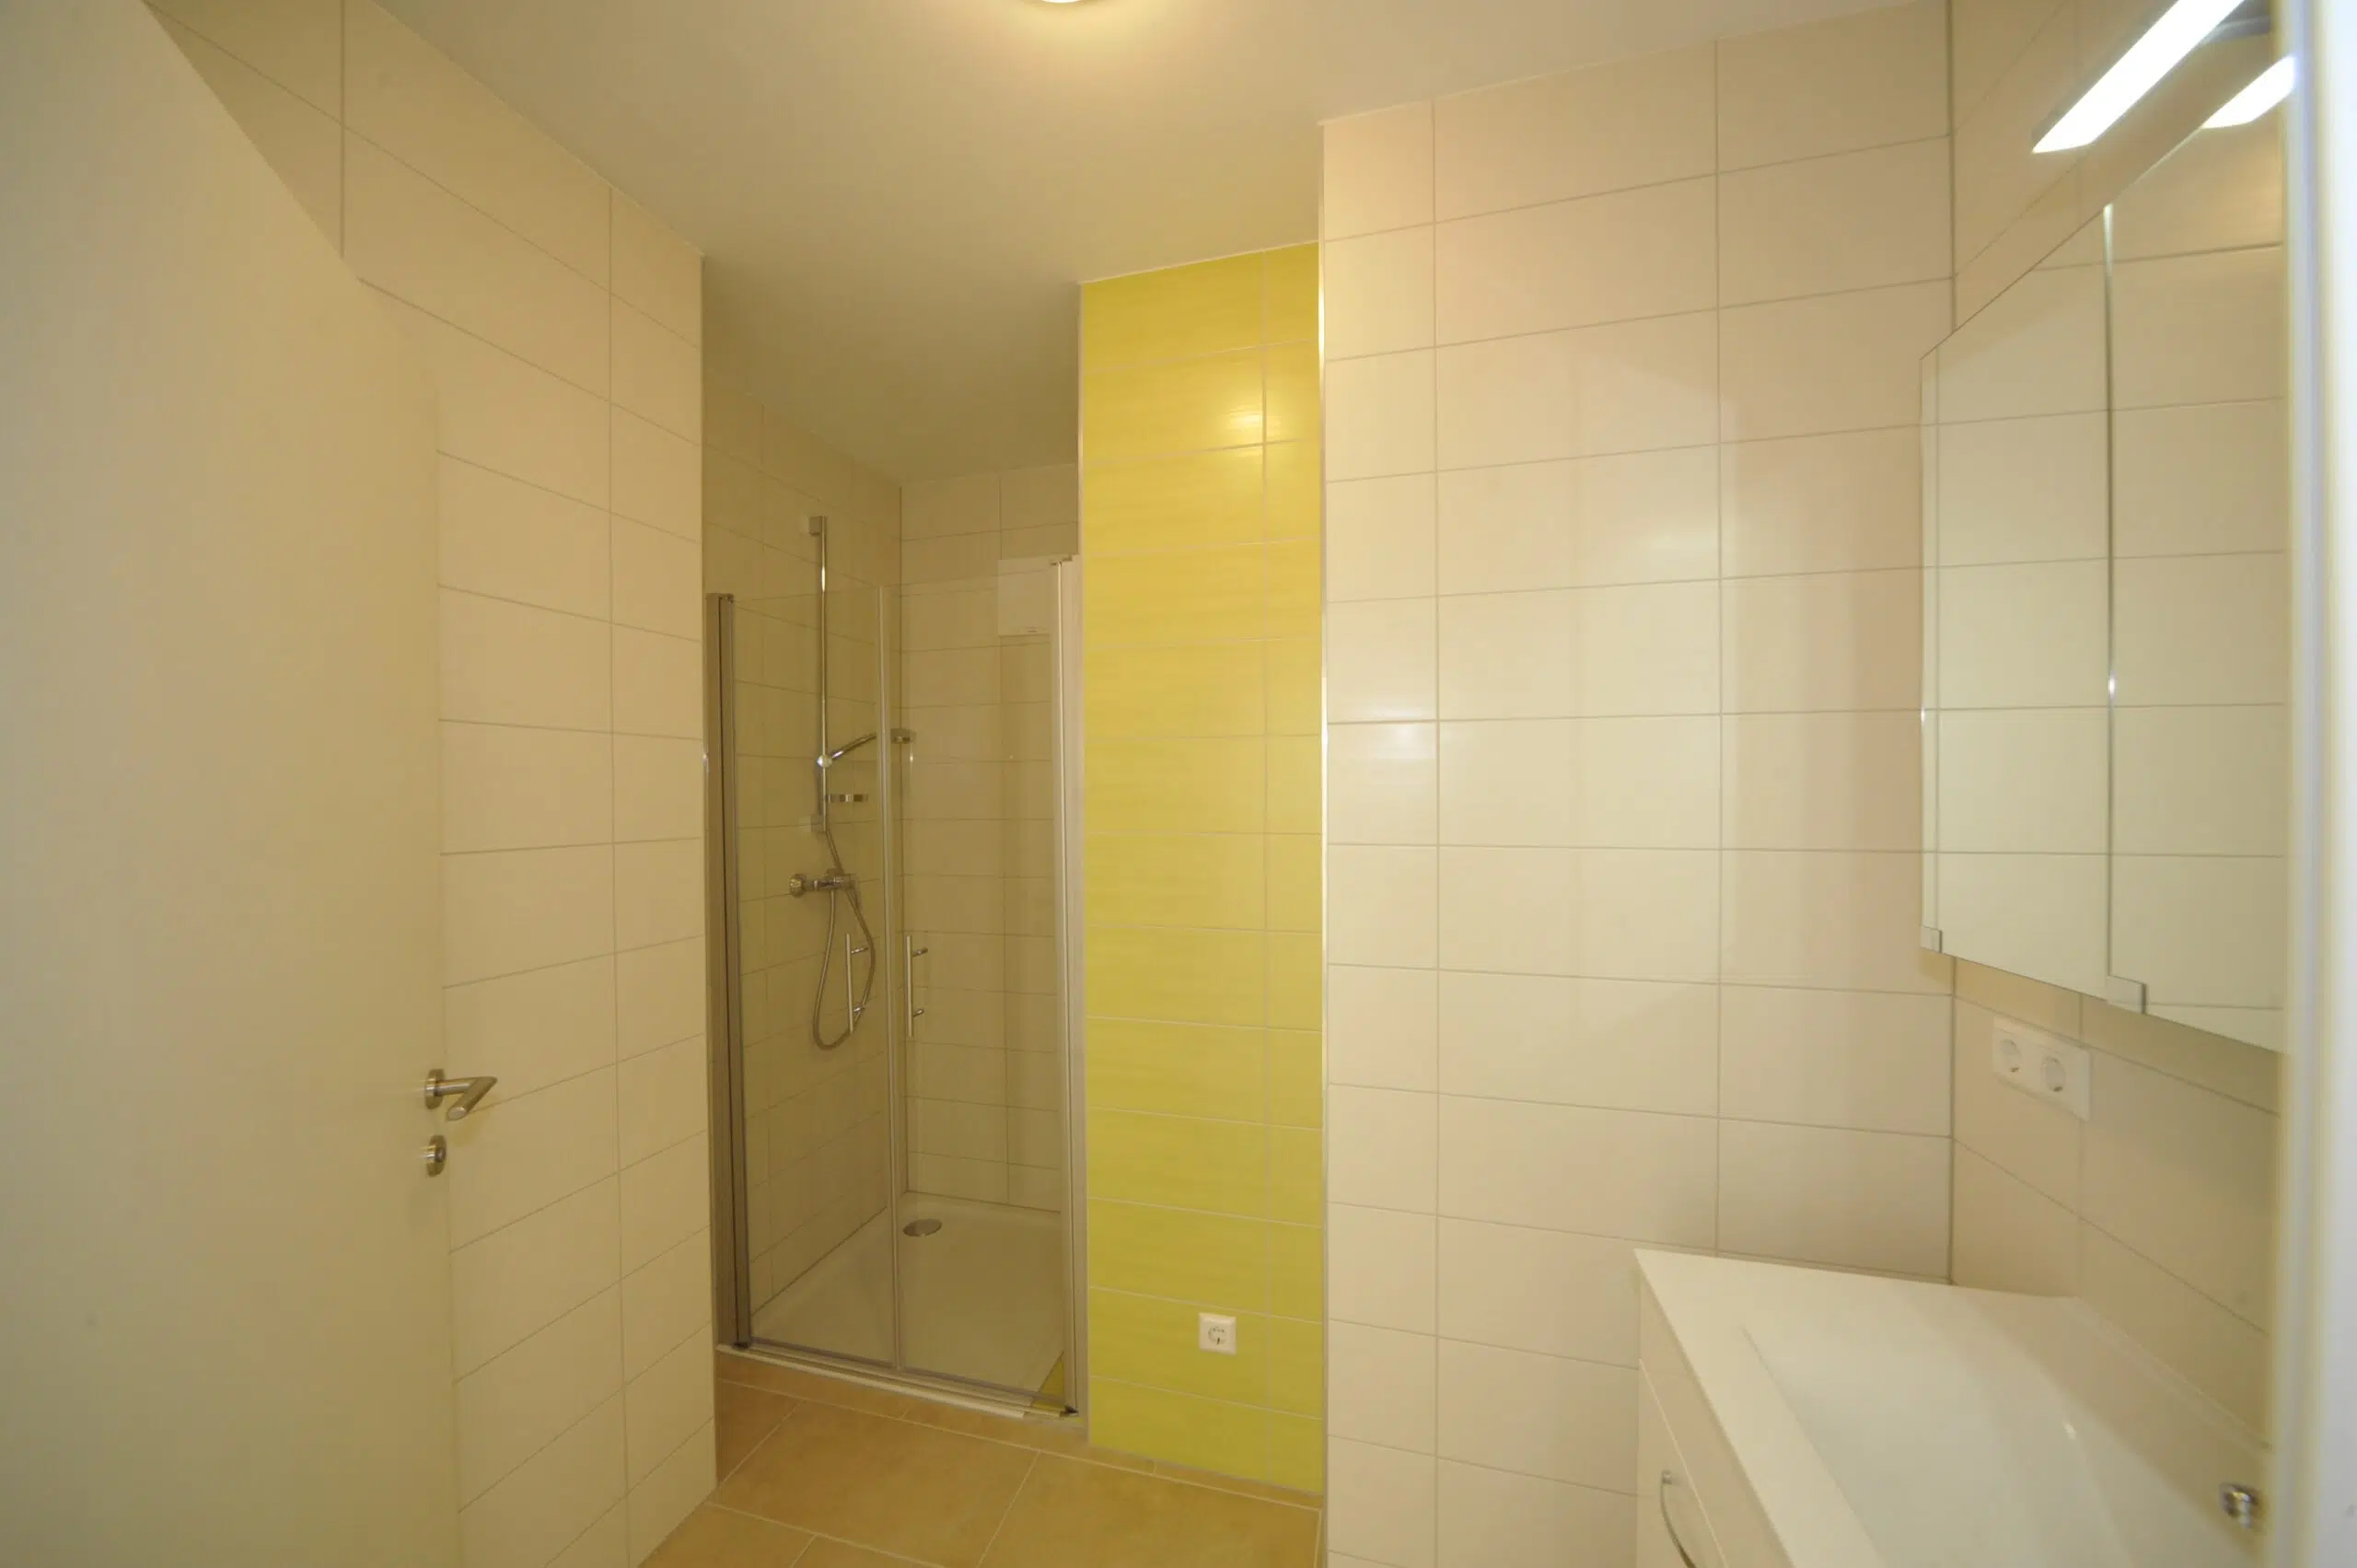 Bathroom in shared flat for fitters in Linz